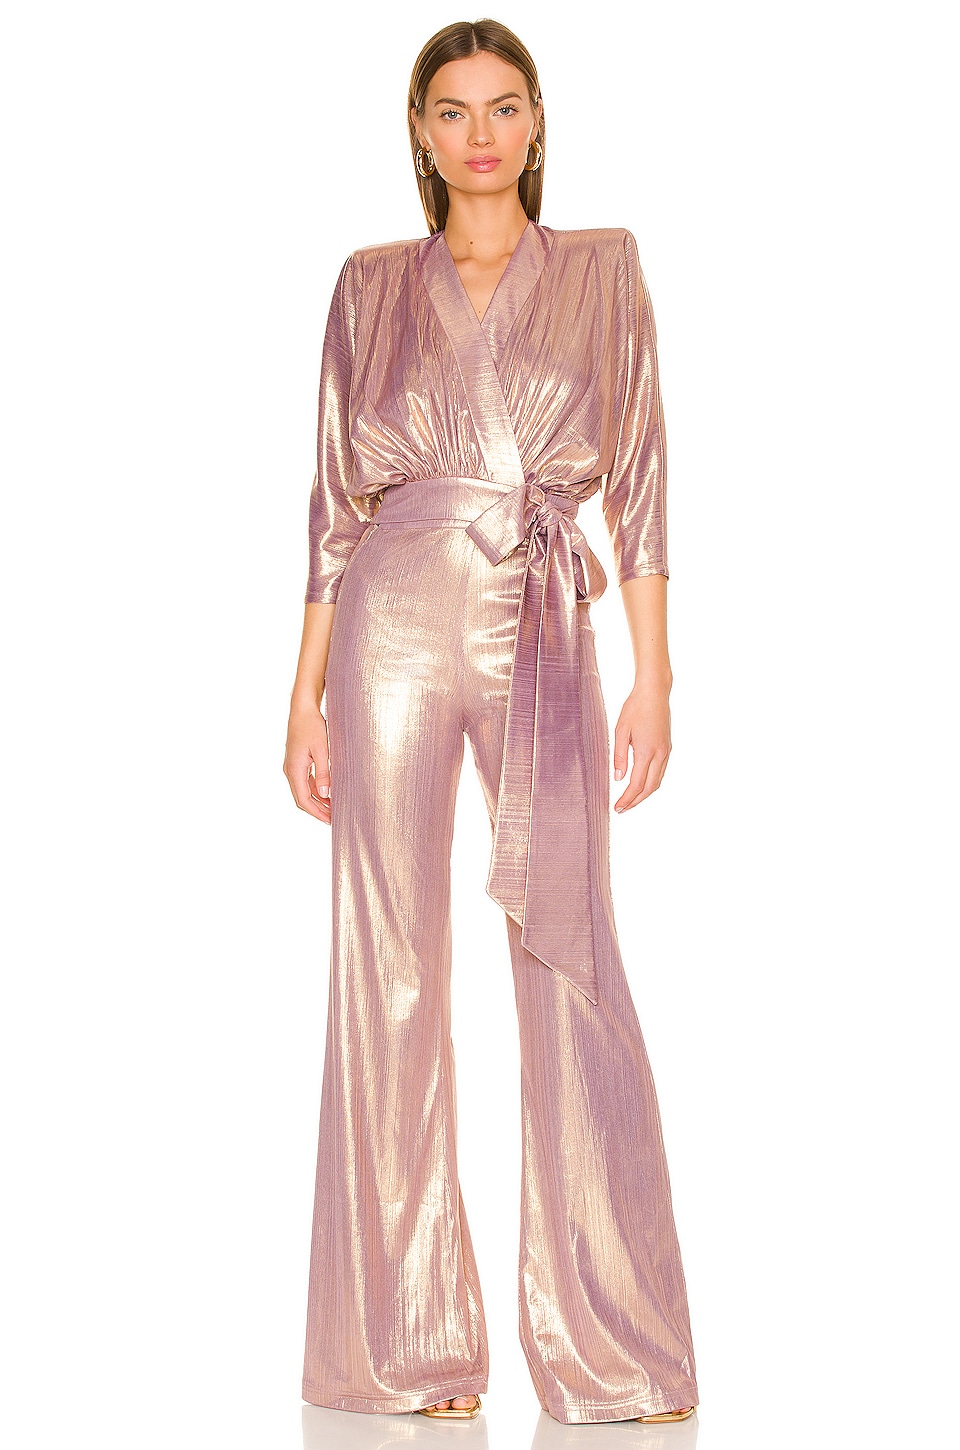 Metallic Purple Rose Gold Designer Jumpsuit for Evening with Long Sleeves and Belt